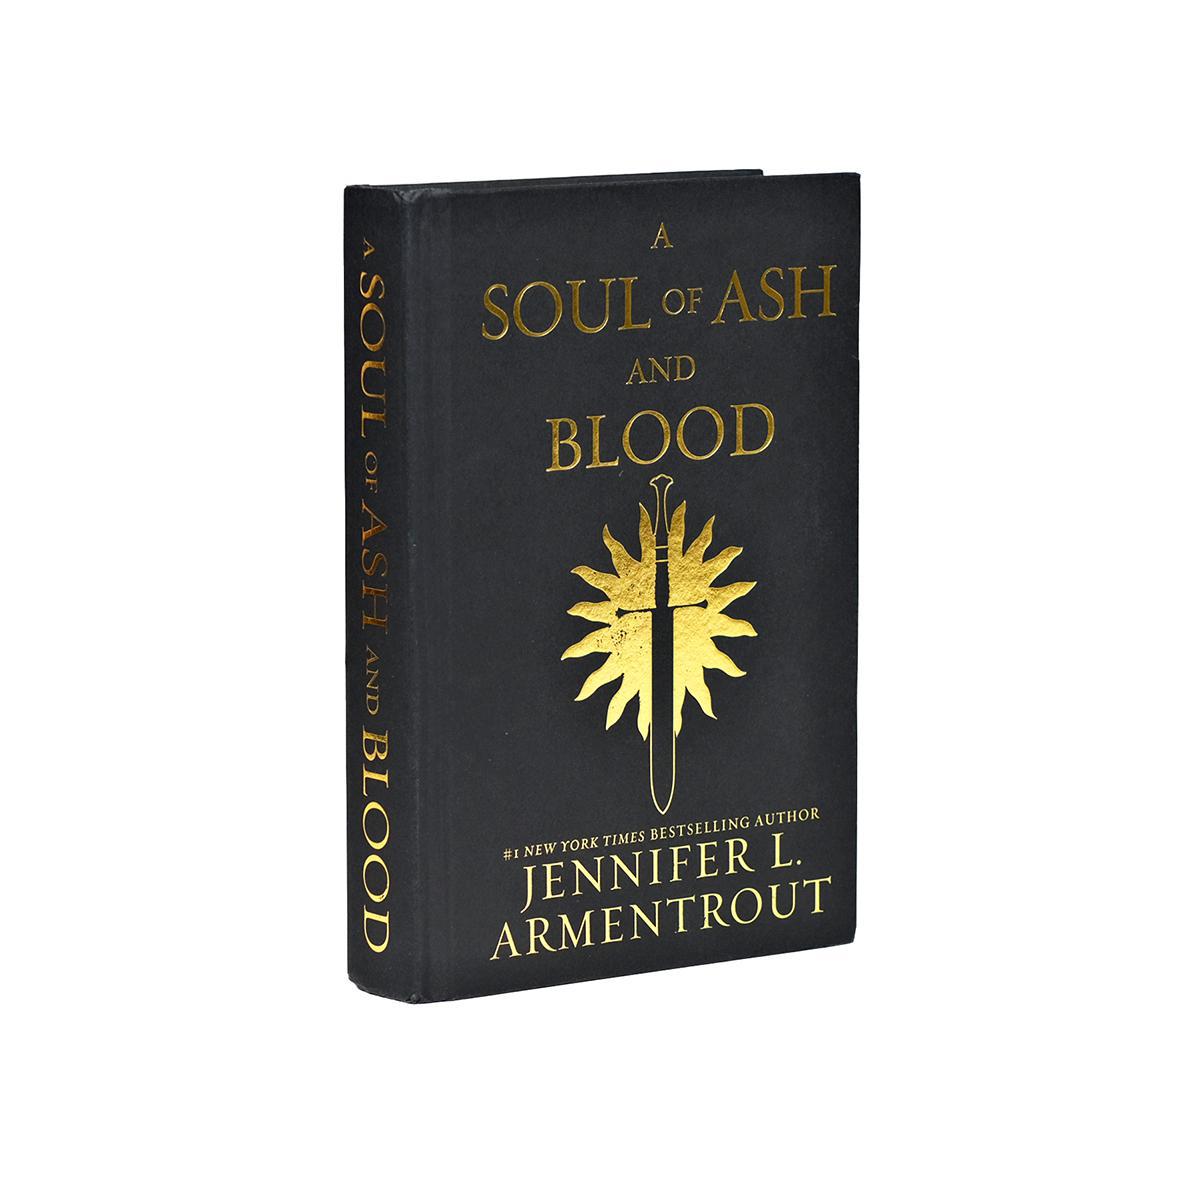 Blood and Ash: A Soul of Ash and Blood - Single Jacket Only - MTO